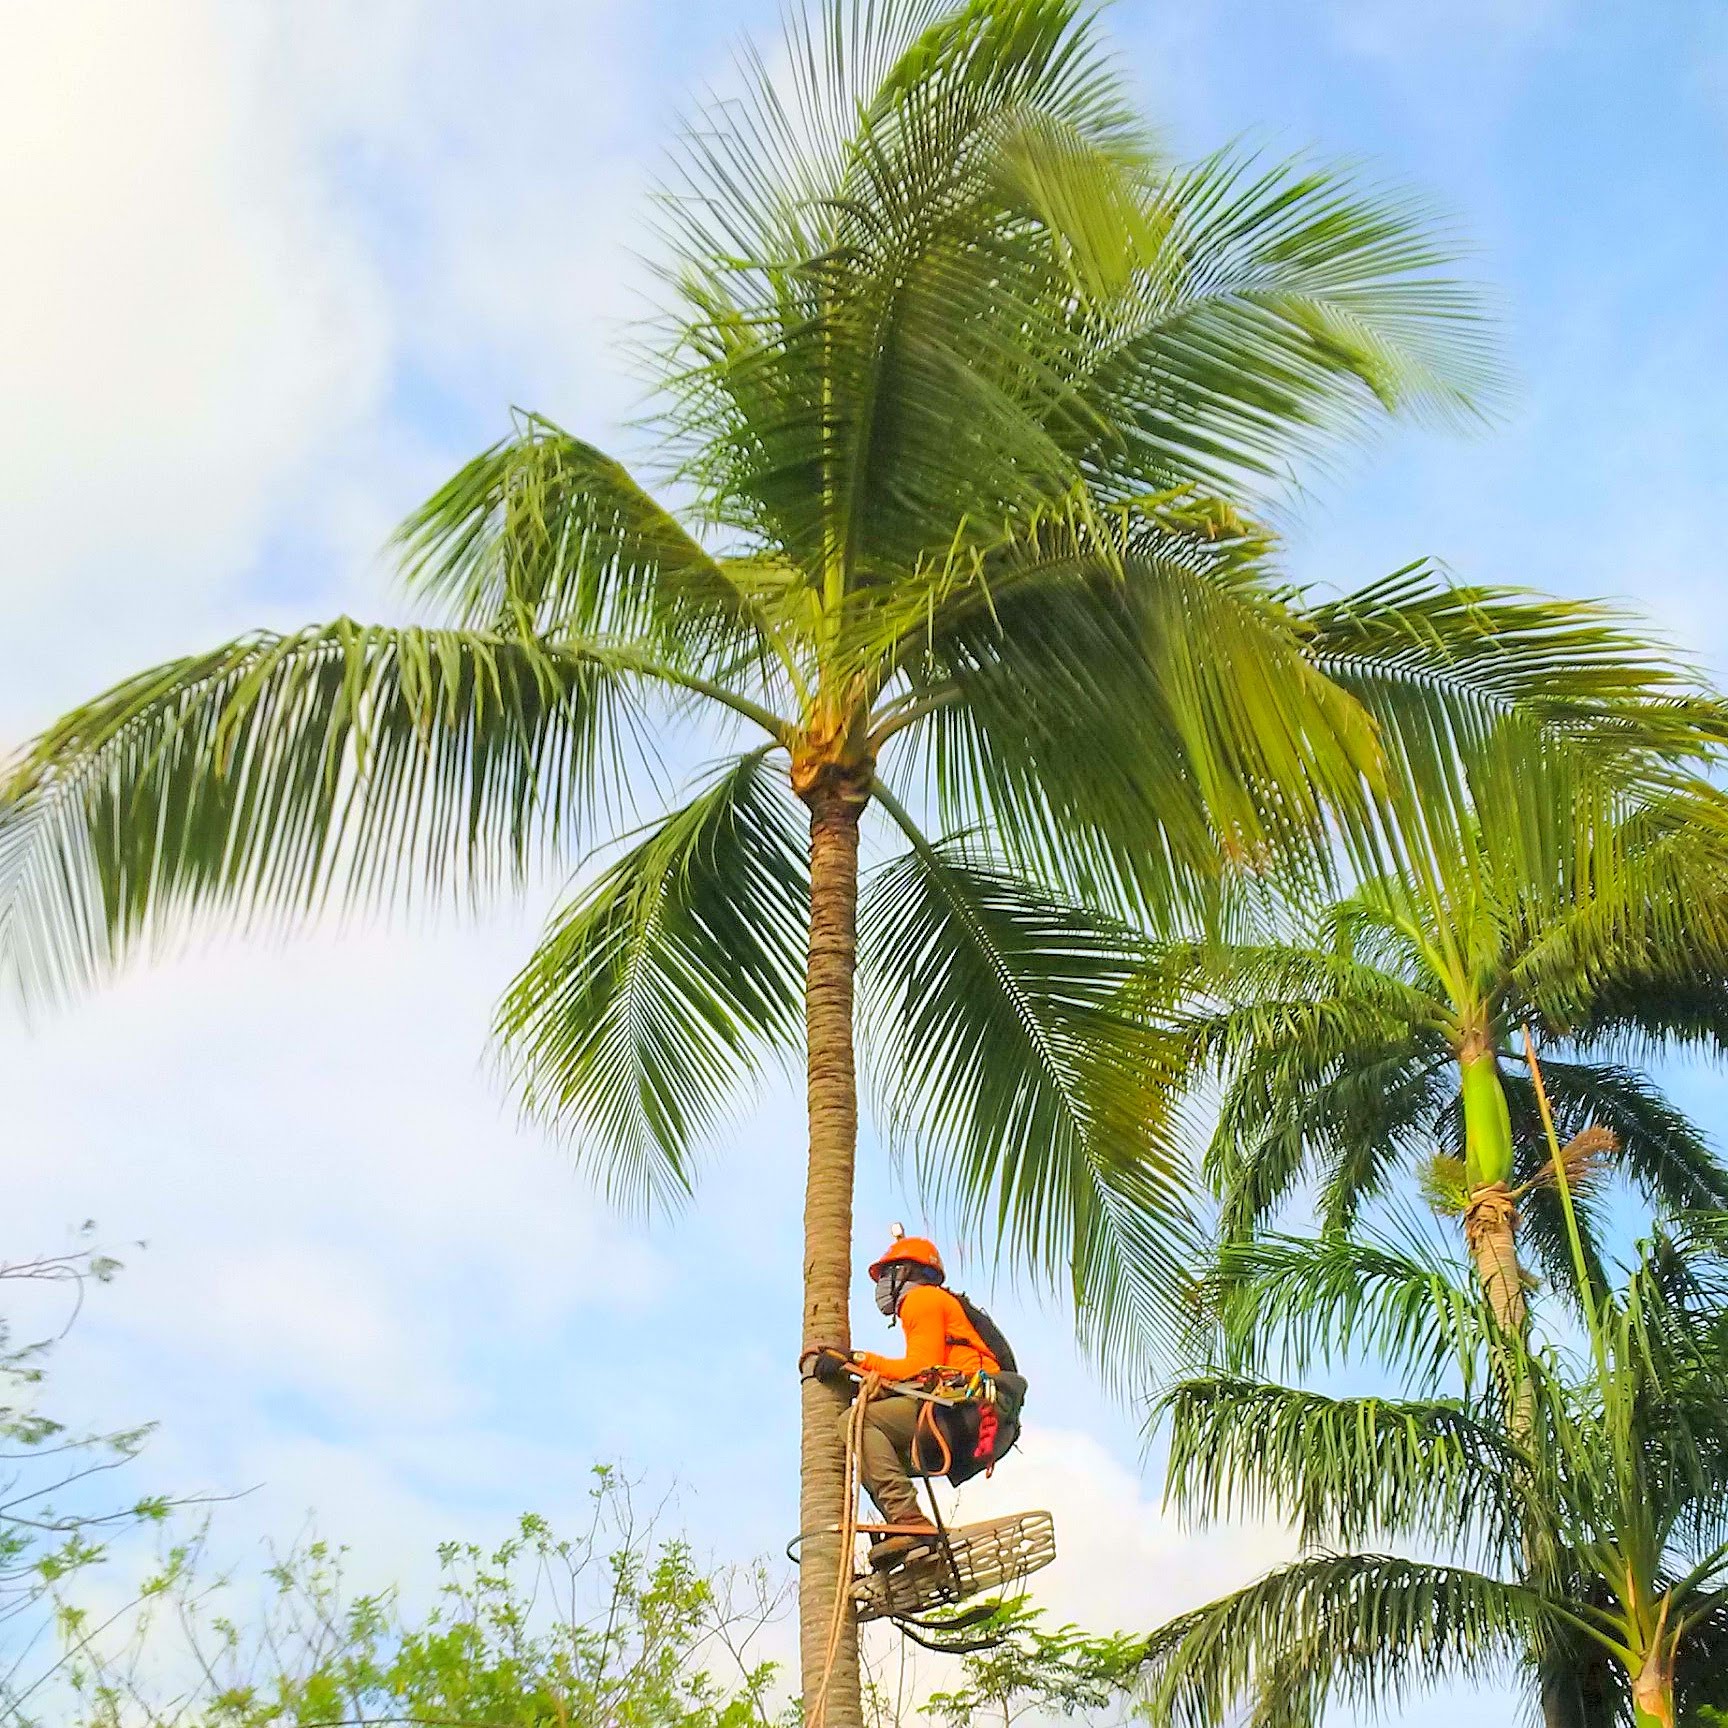 HOW TO TRIM A COCONUT/PALM TREE SPIKELESS - YouTube